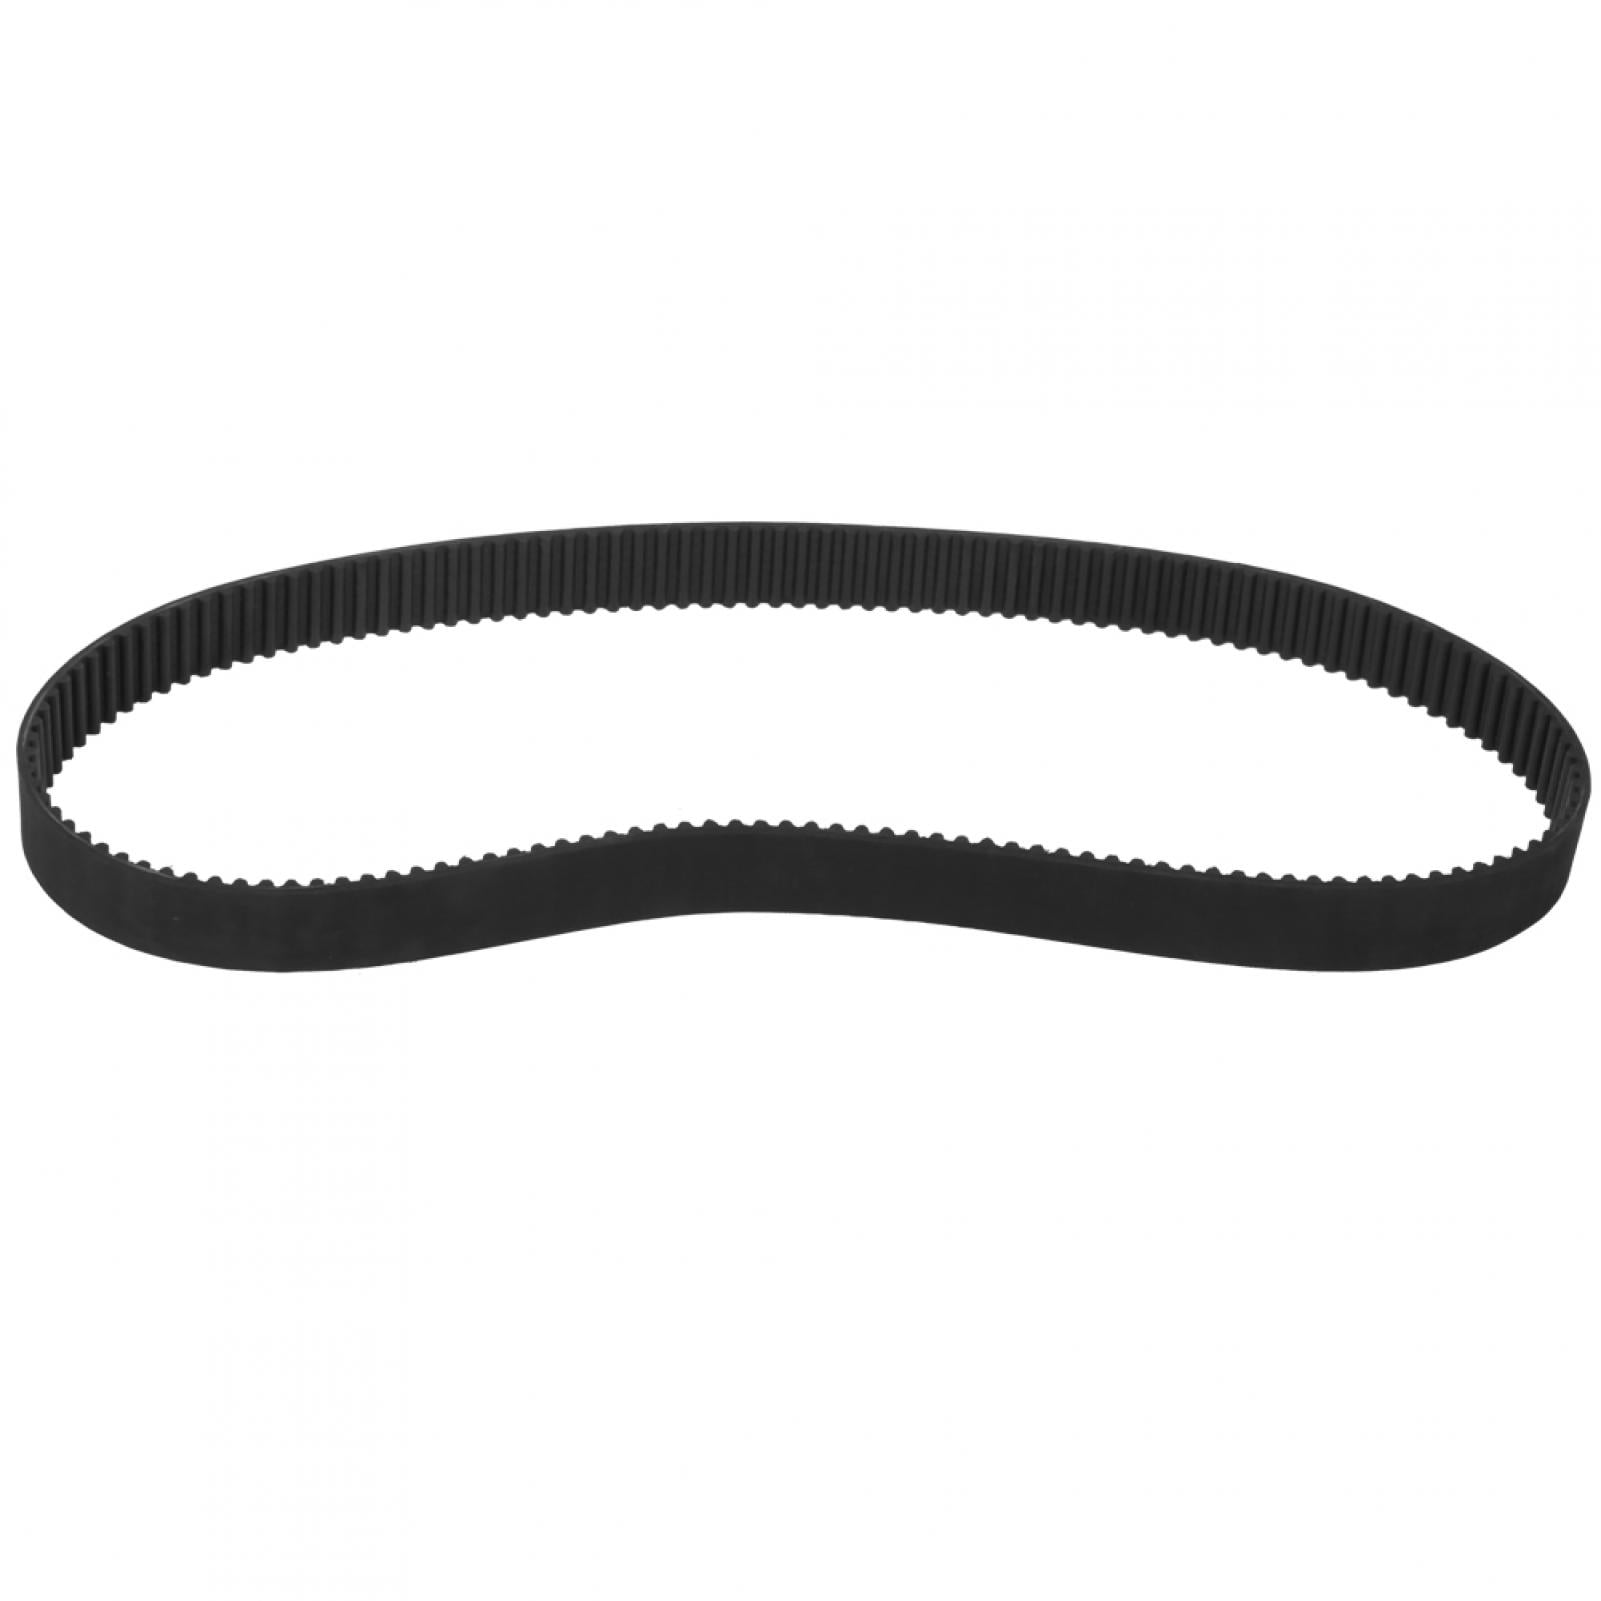 Grease Resistance Aging Resistance Heat Resistance Driving Belt Small Scooter Synchronous Belt Transmission Belt Bending Resistance for Electric Bicycle